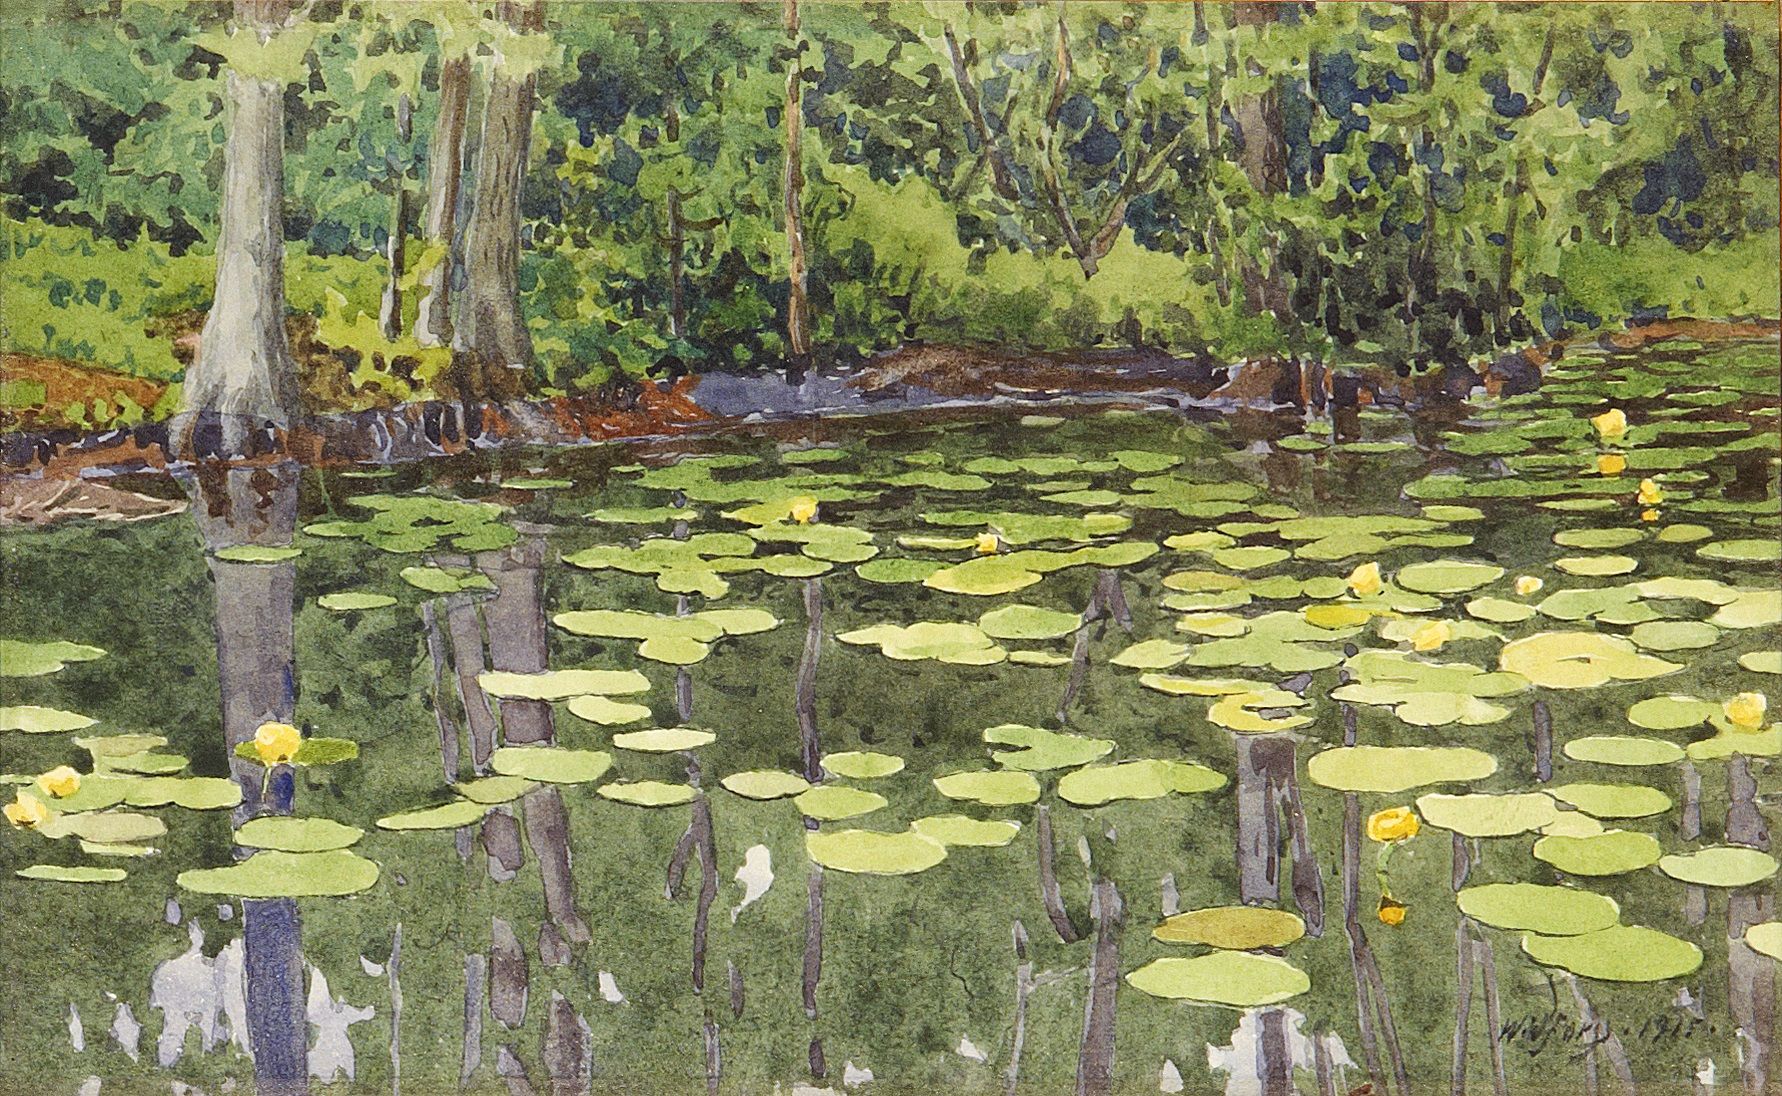 Pond full of lily pads with trees hanging over the surface.